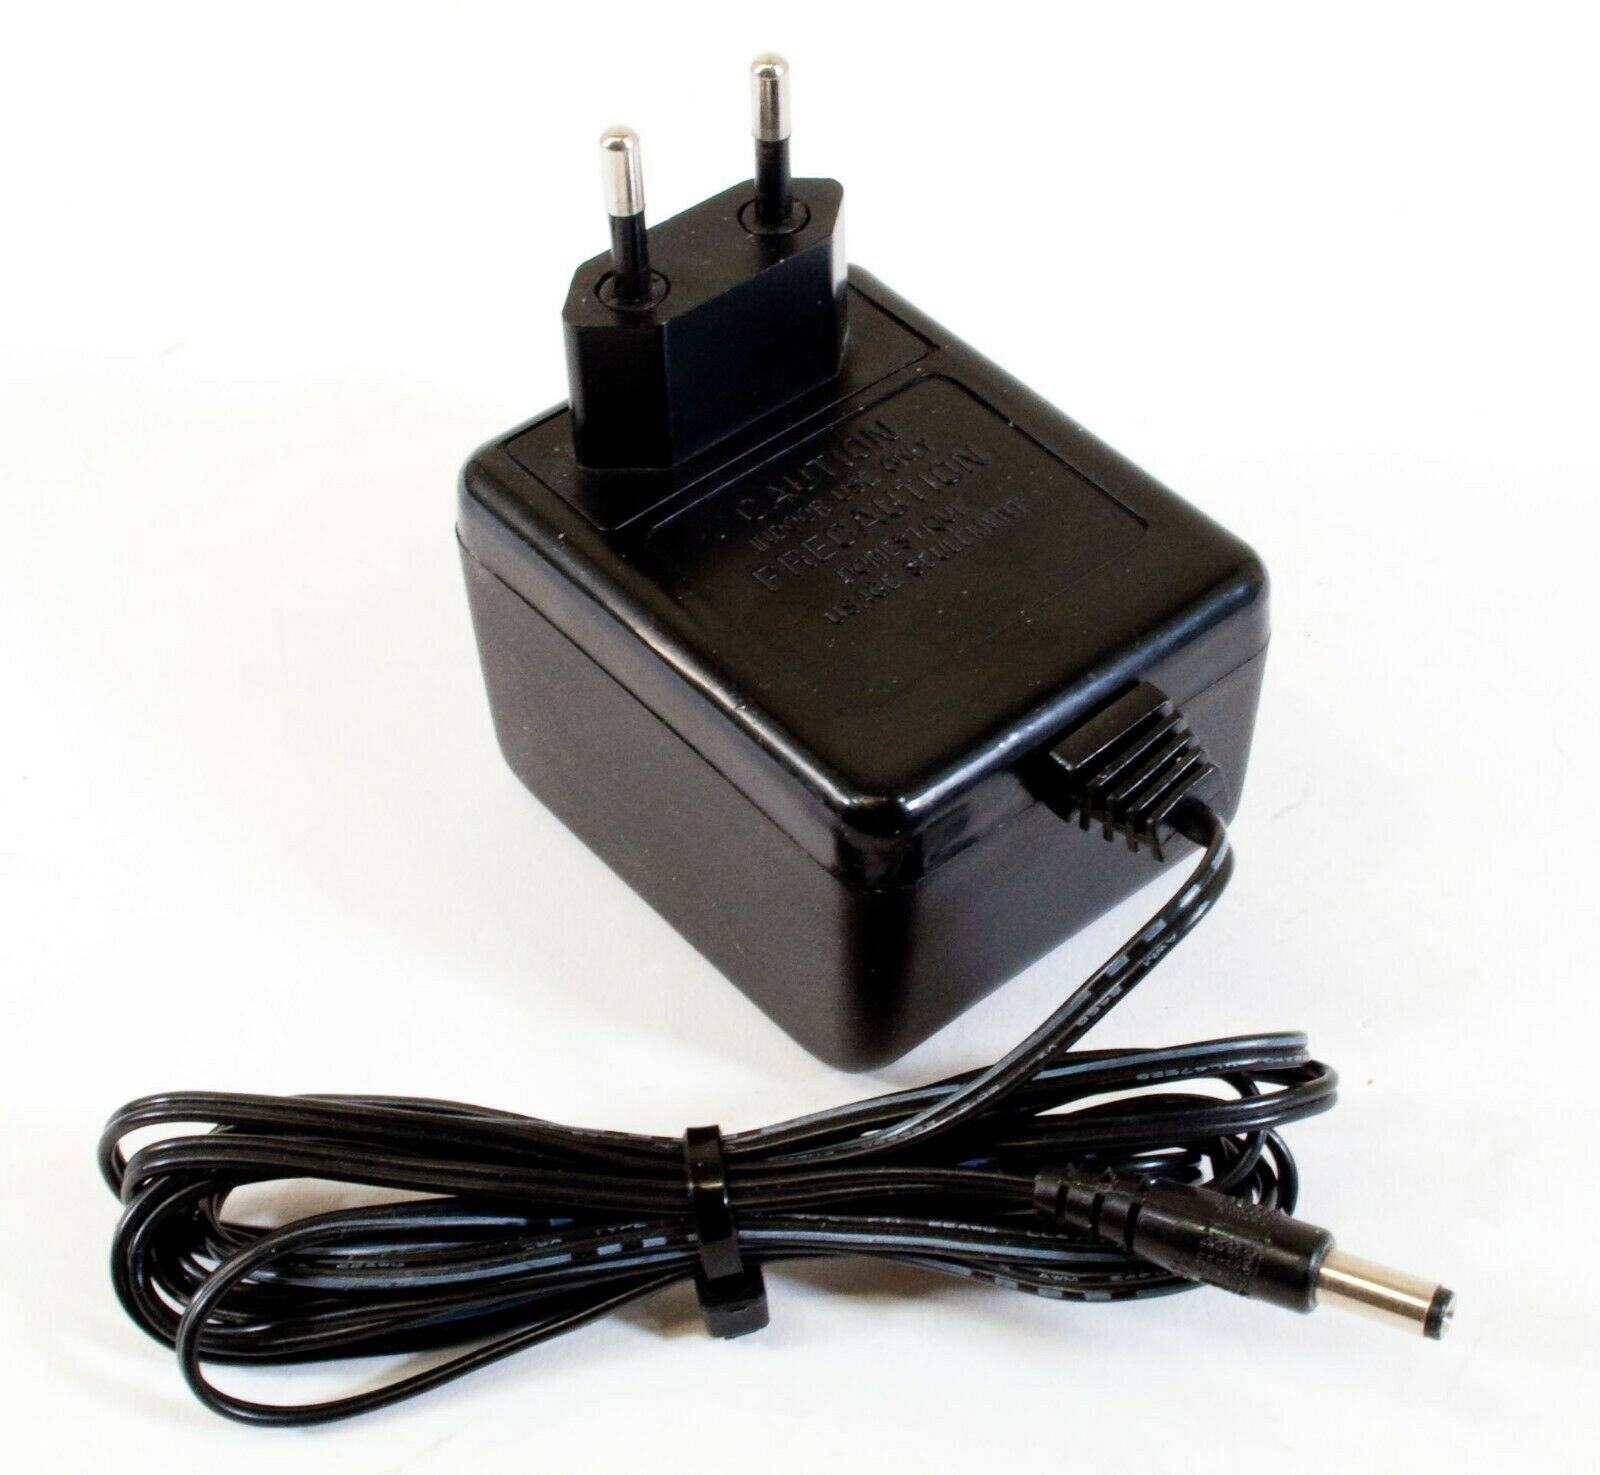 Anoma AD-0329F AC Adapter 9V 1A Original Charger Power Supply Europlug Output Current: 1 A MPN: AD-0329F Brand: Ano